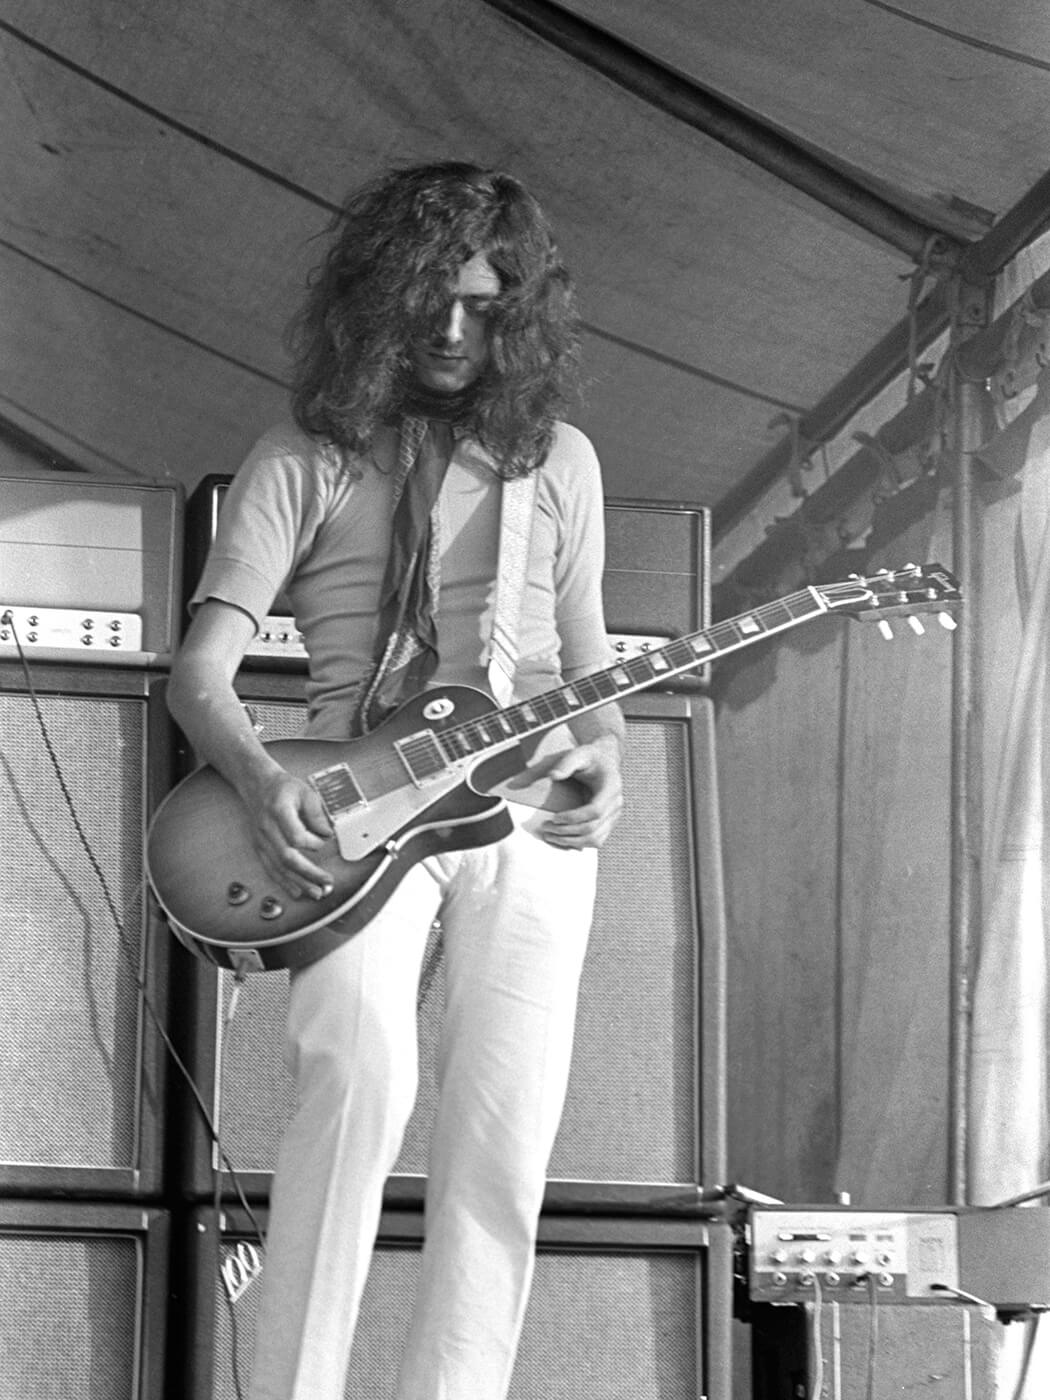 Jimmy Page performing at the Bath Festival in 1969, photo by Chris Walter/WireImage via Getty Images